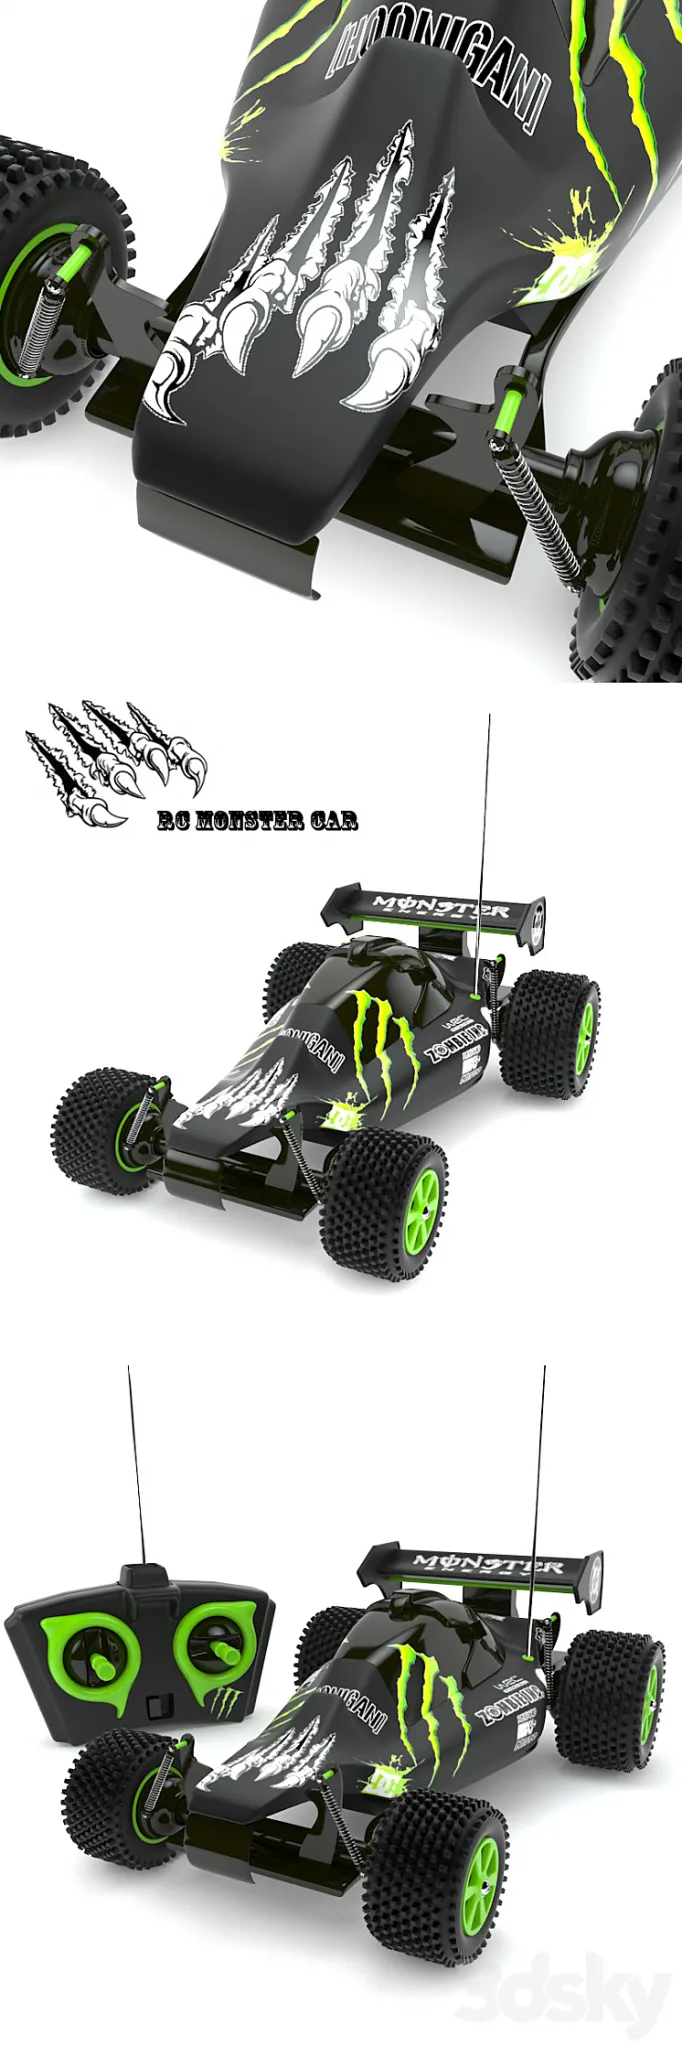 rc monster car 3DS Max